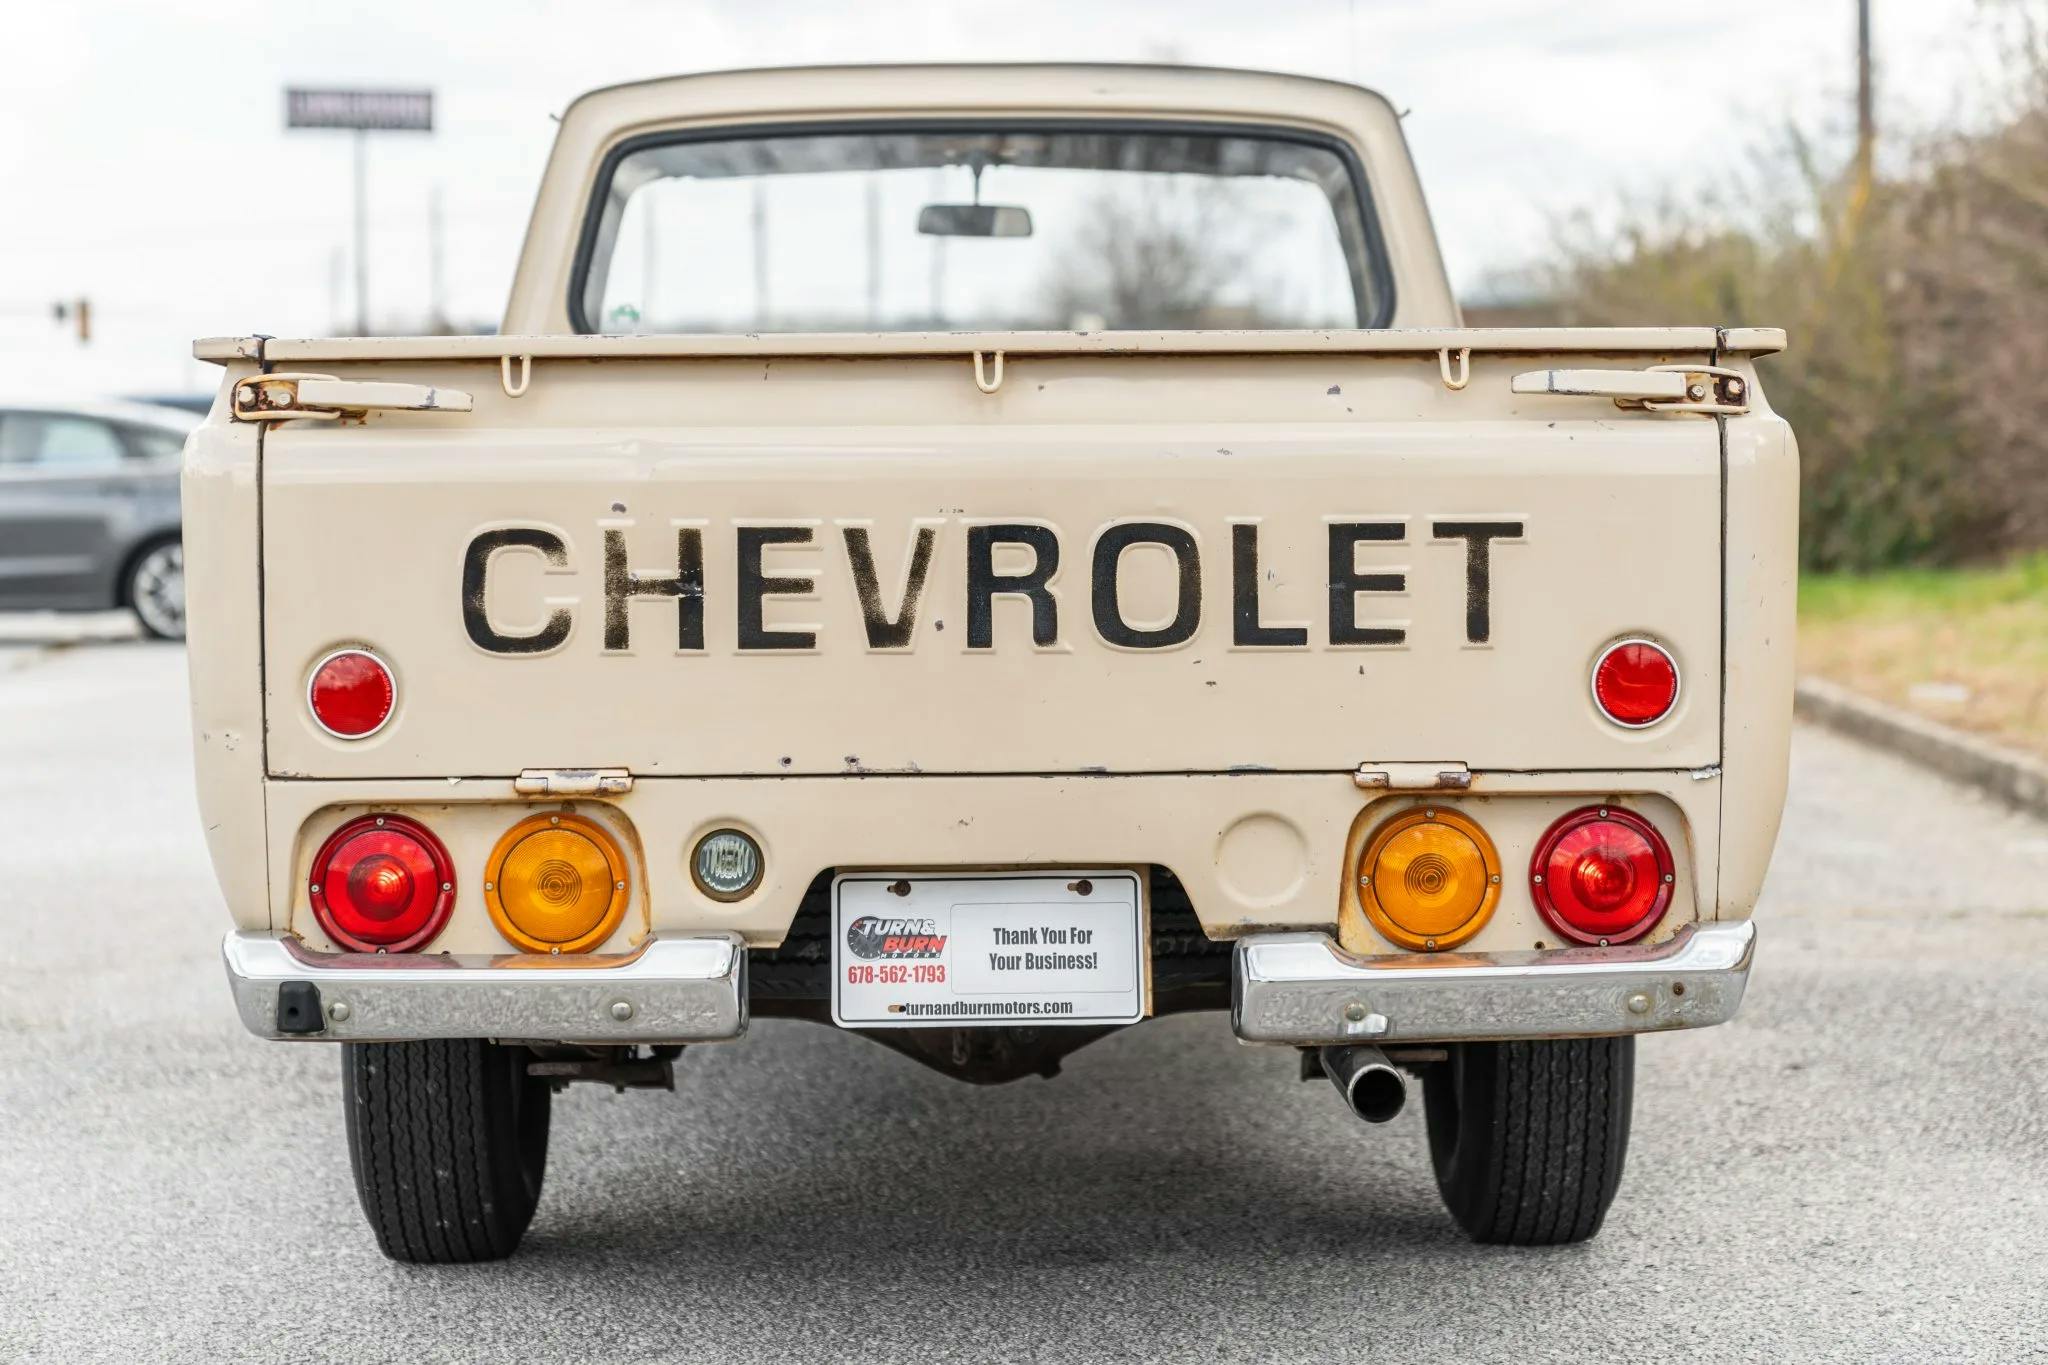 1972 Chevrolet LUV small pickup rear tailgate